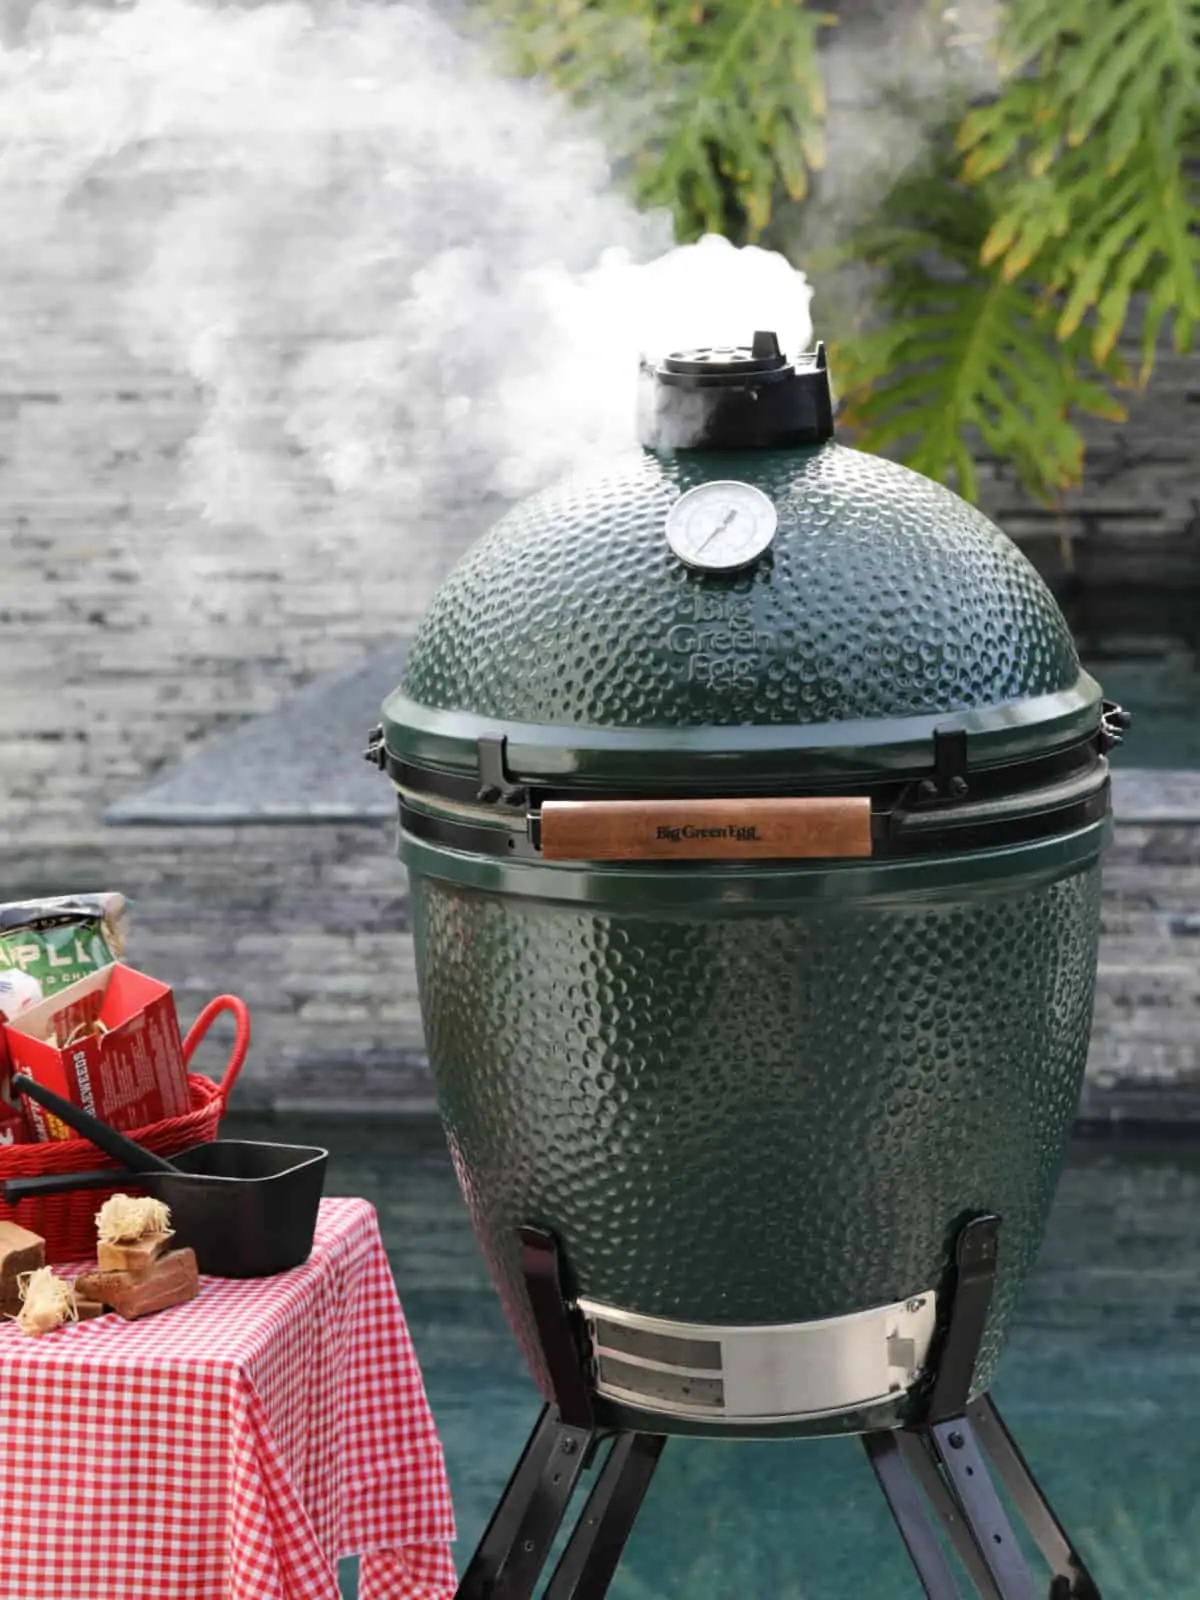 Smoke coming out of the top of a Big Green Egg smoker by a pool.